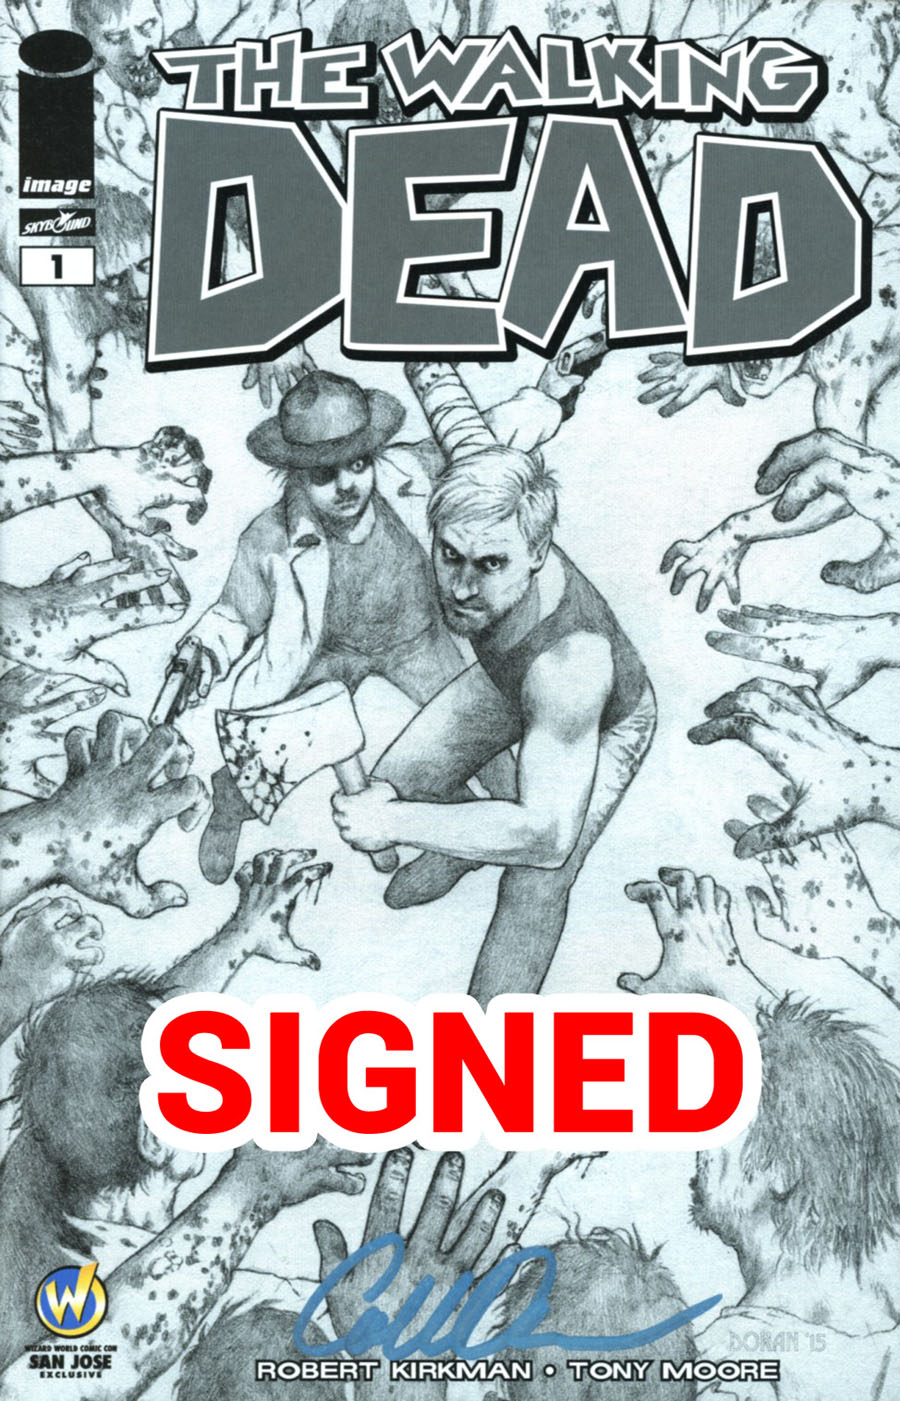 Walking Dead #1 Cover Y Wizard World Comic Con San Jose VIP Exclusive Colleen Doran Sketch Variant Cover Signed By Colleen Doran